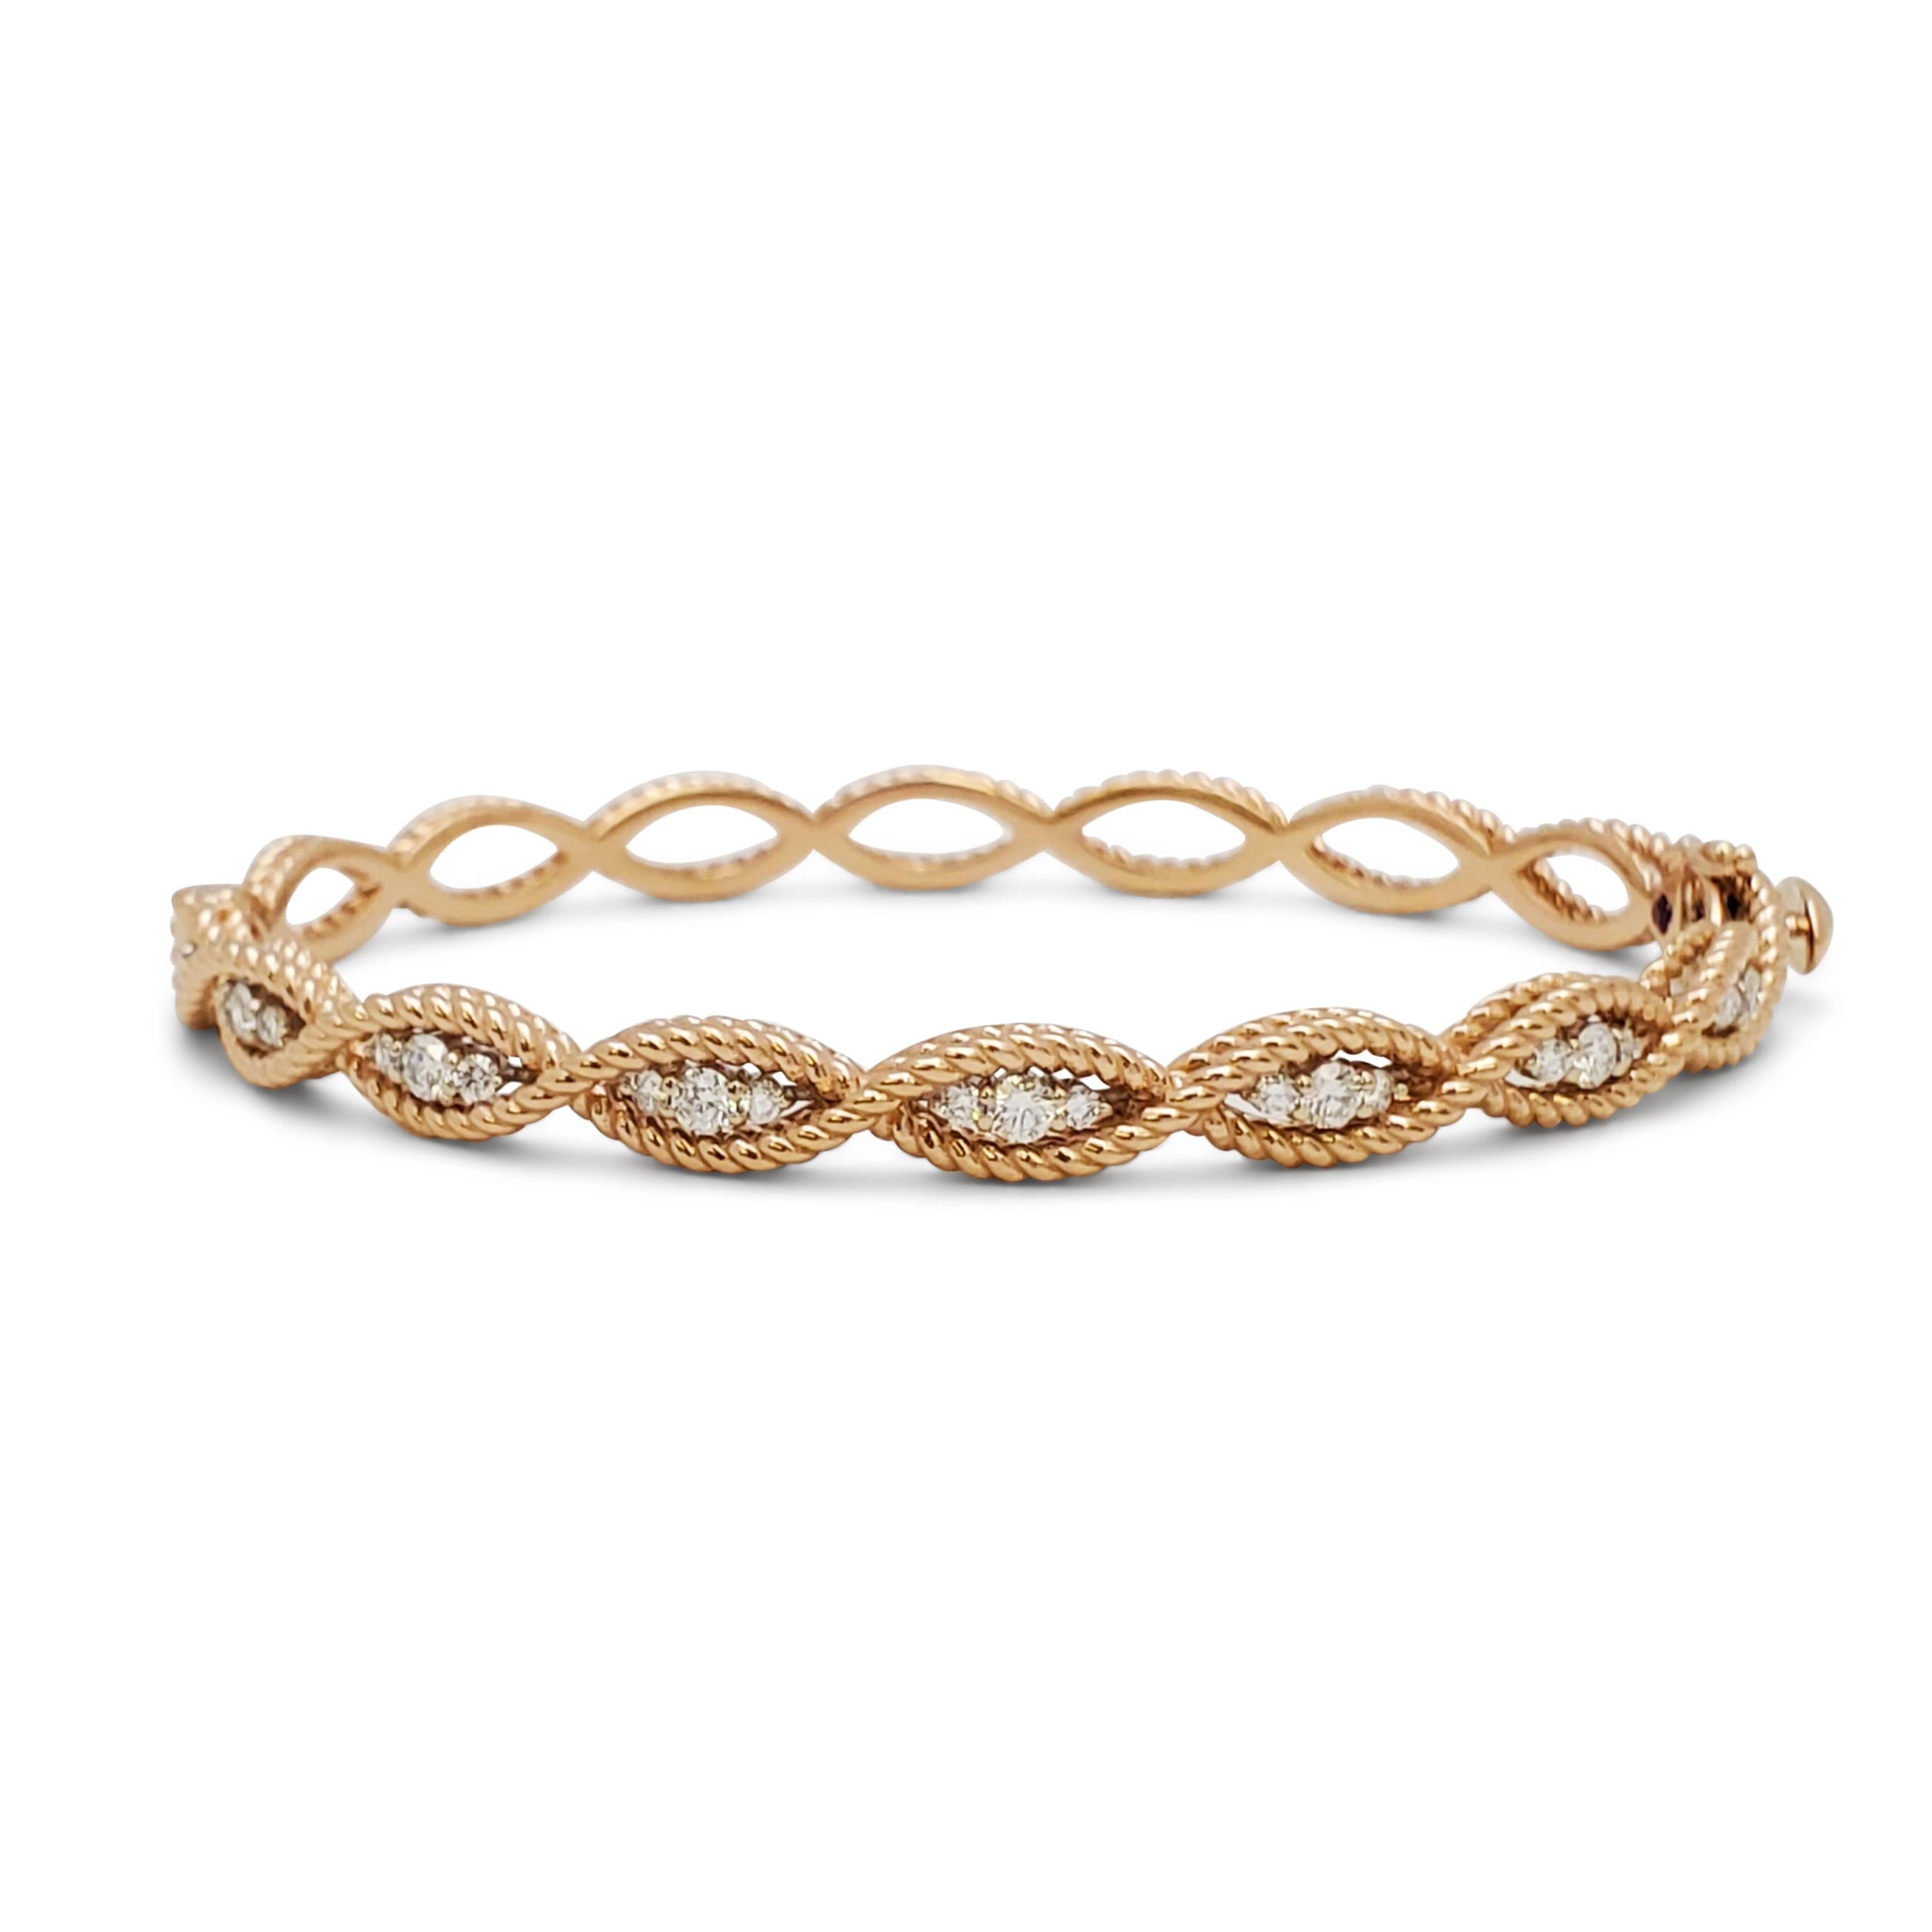 Authentic Roberto Coin 'Barocco' bracelet crafted in 18 karat rose gold.  Half of the twisted rope design is set with an estimated .56 carats of sparkling round brilliant diamonds. The bracelet measures 5mm wide with an internal circumference of 6